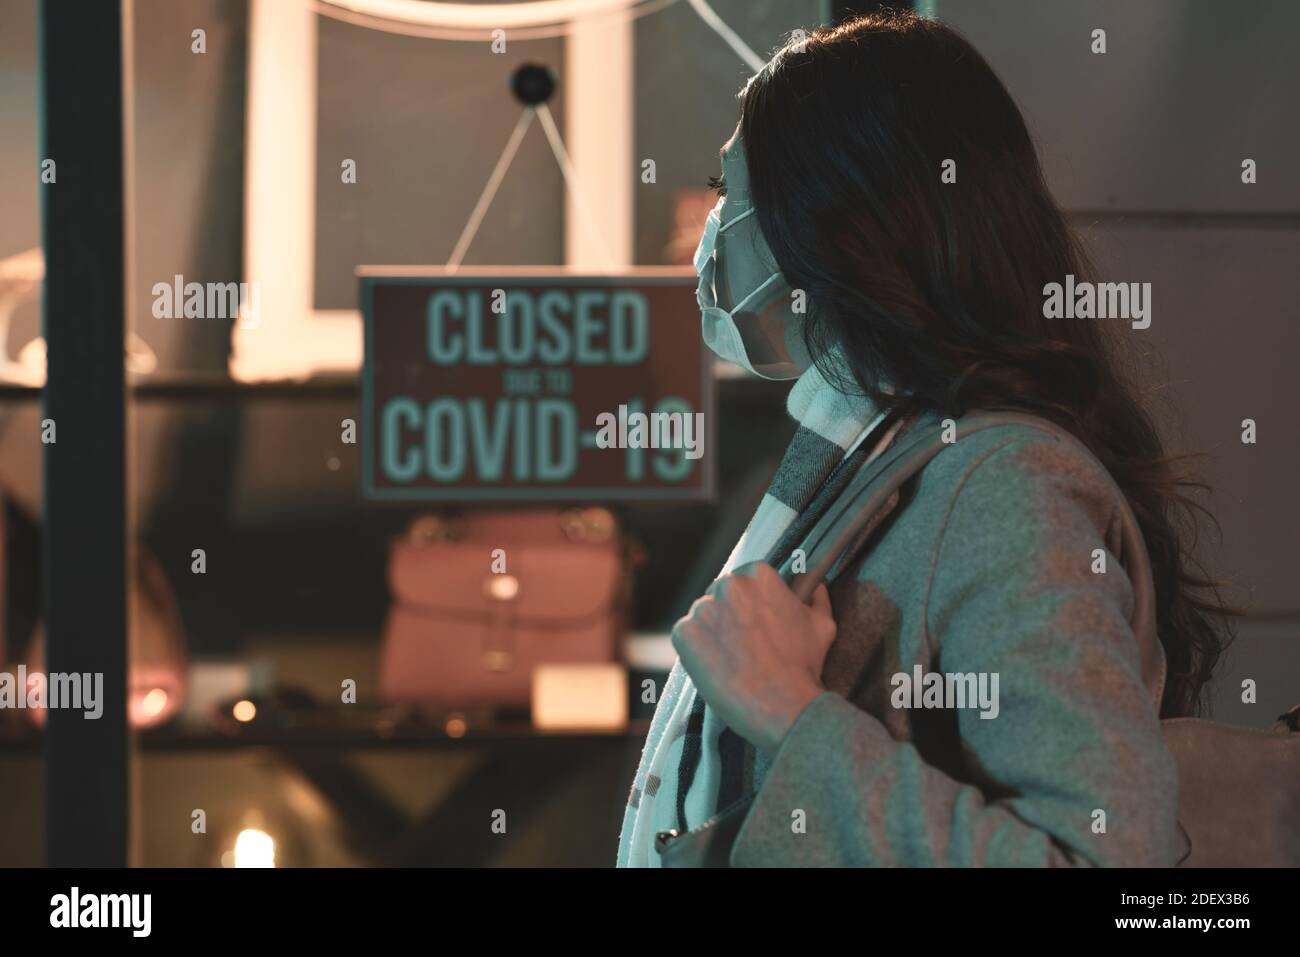 Store closed due to coronavirus covid-19 outbreak, a woman with surgical mask is reading the sign Stock Photo